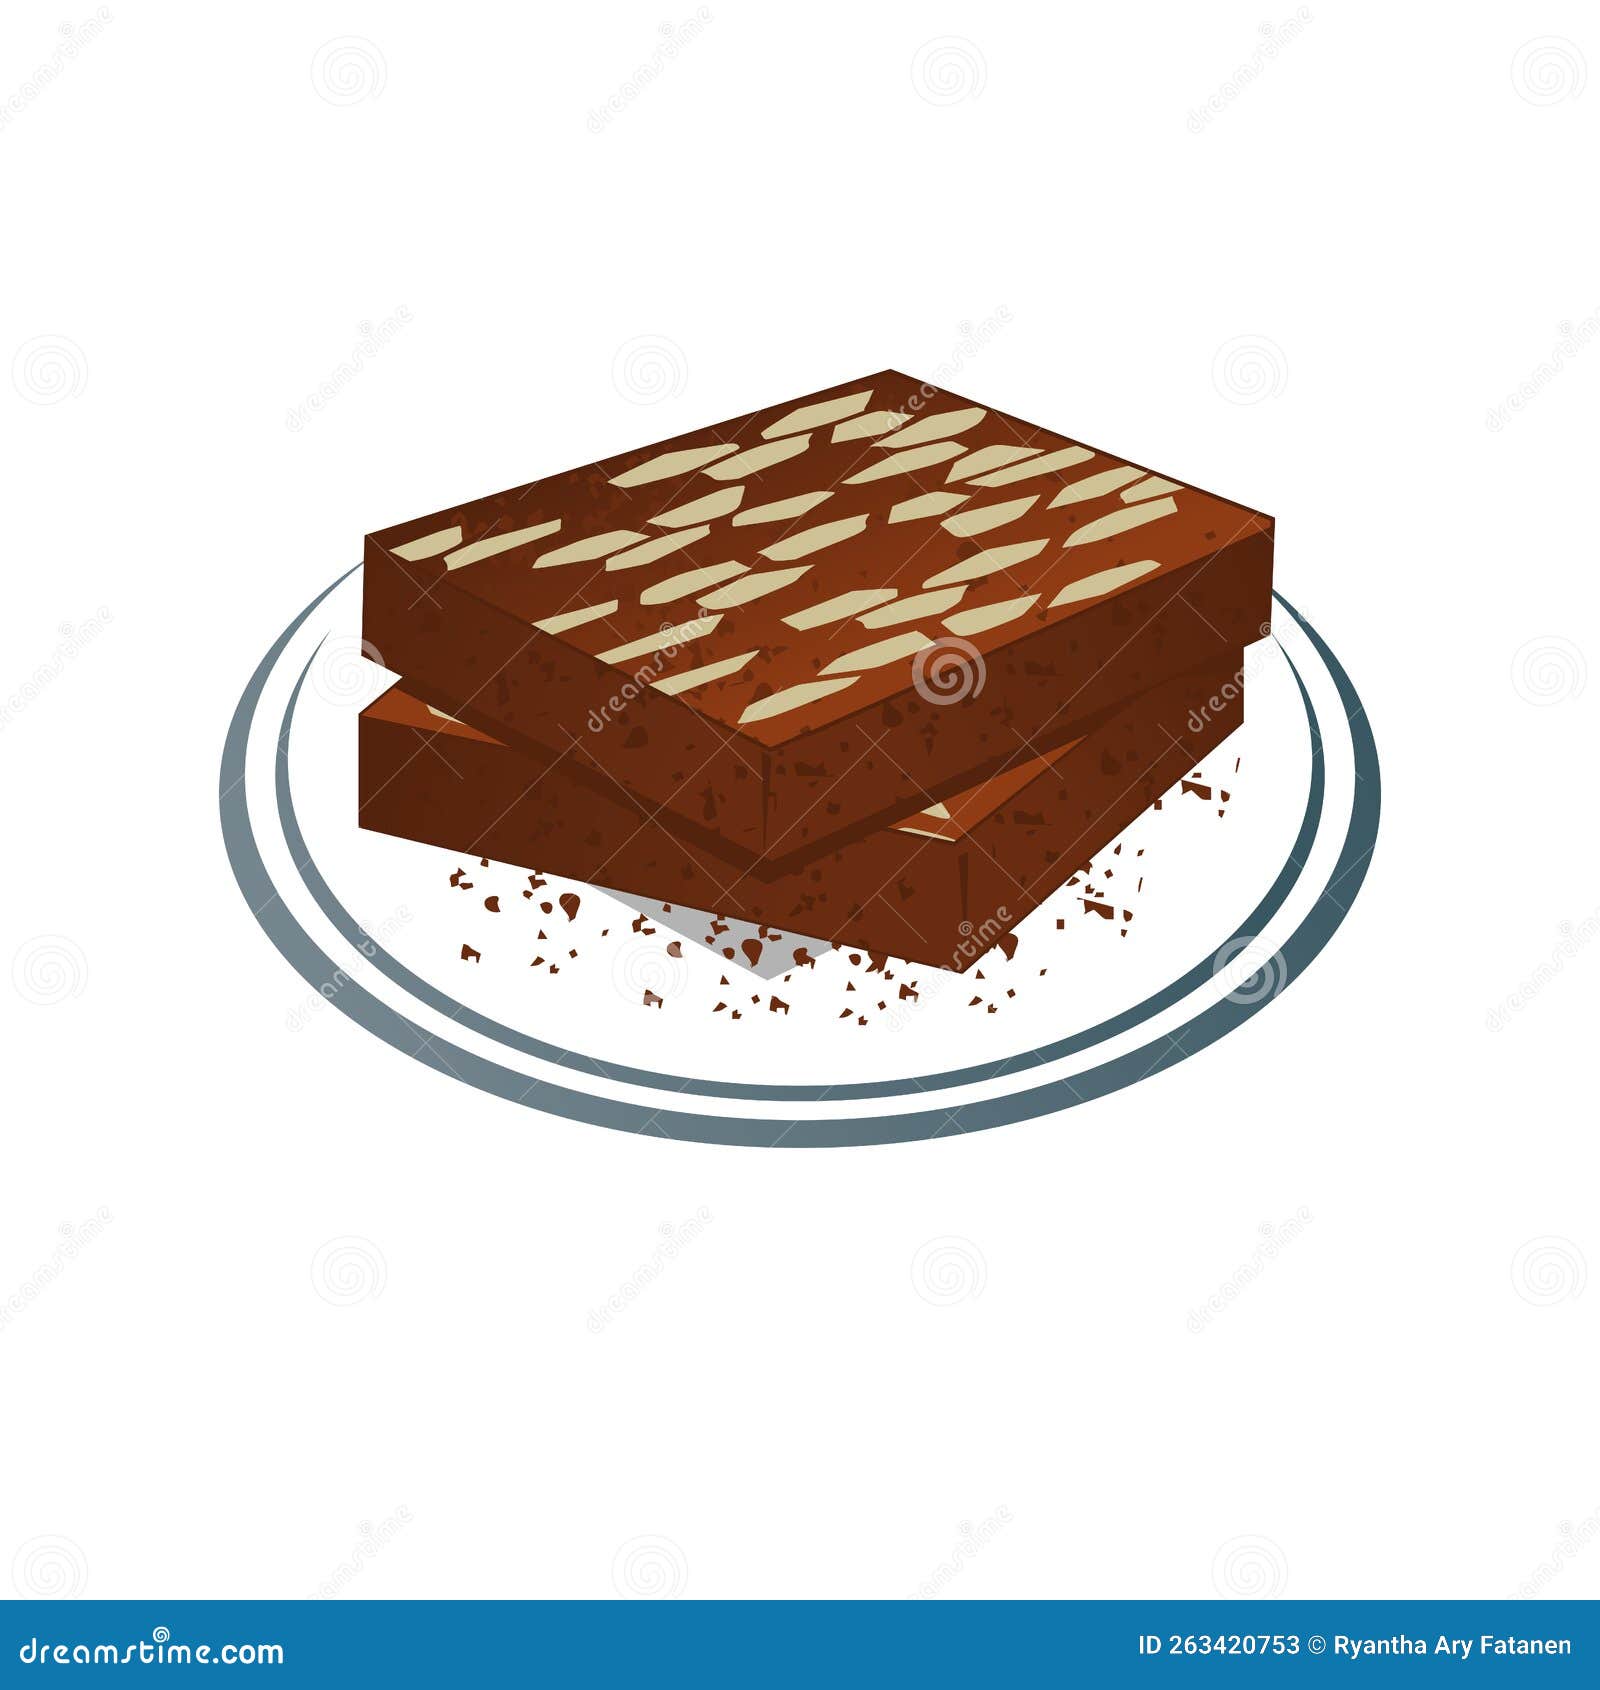 two pieces of chocolate mosaico cake on a plate